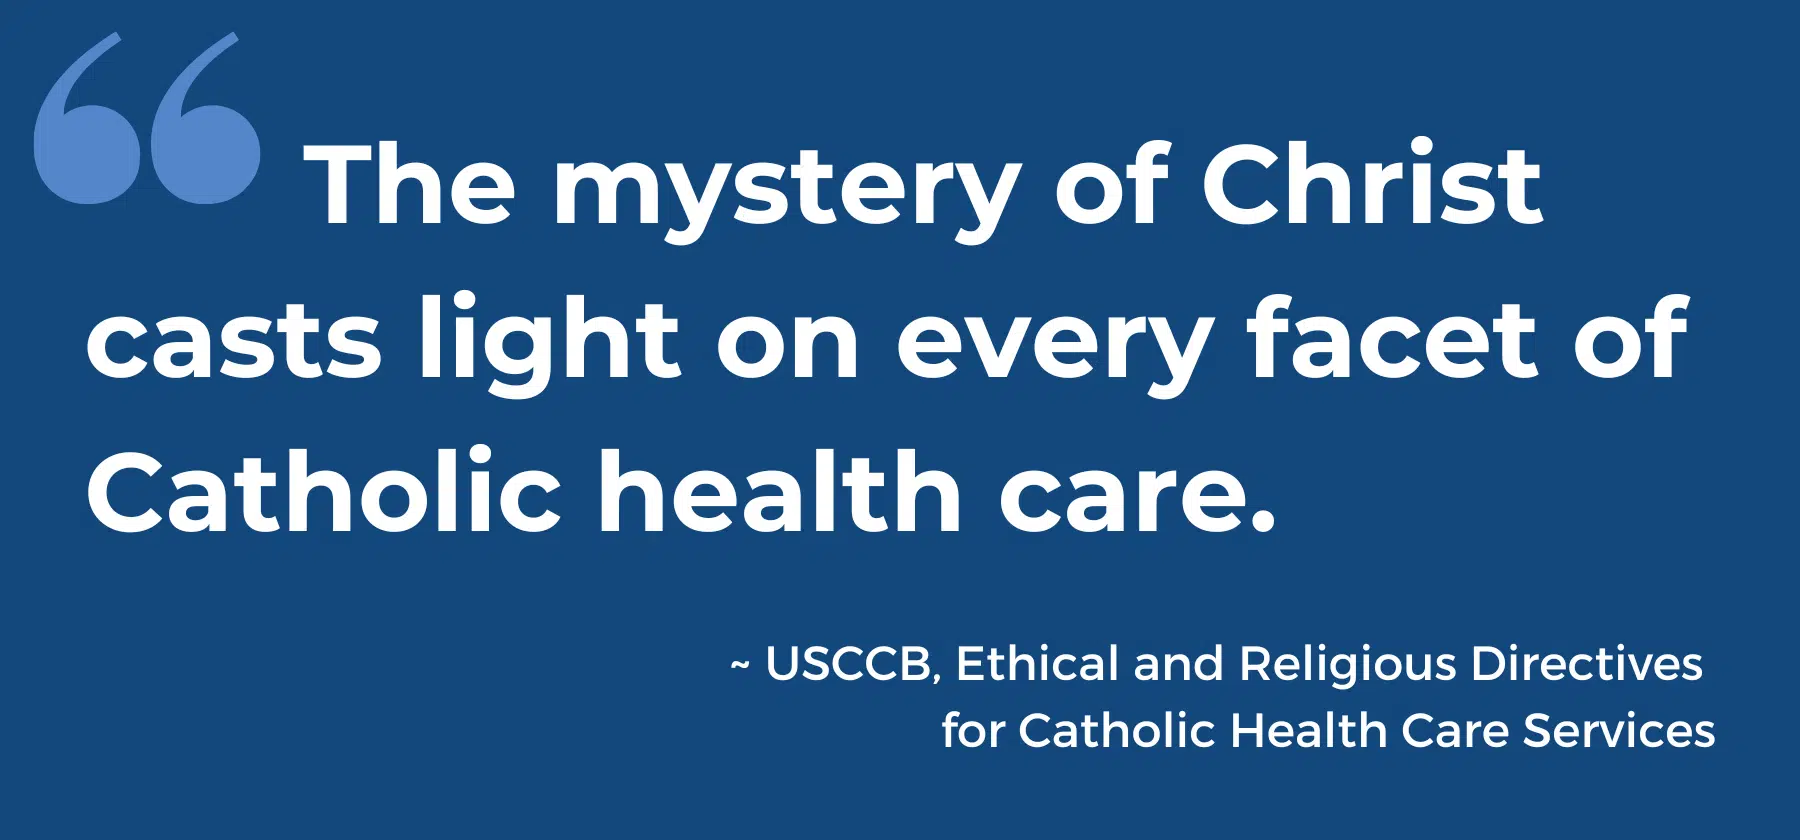 The mystery of Christ casts light on every facet of Catholic health care